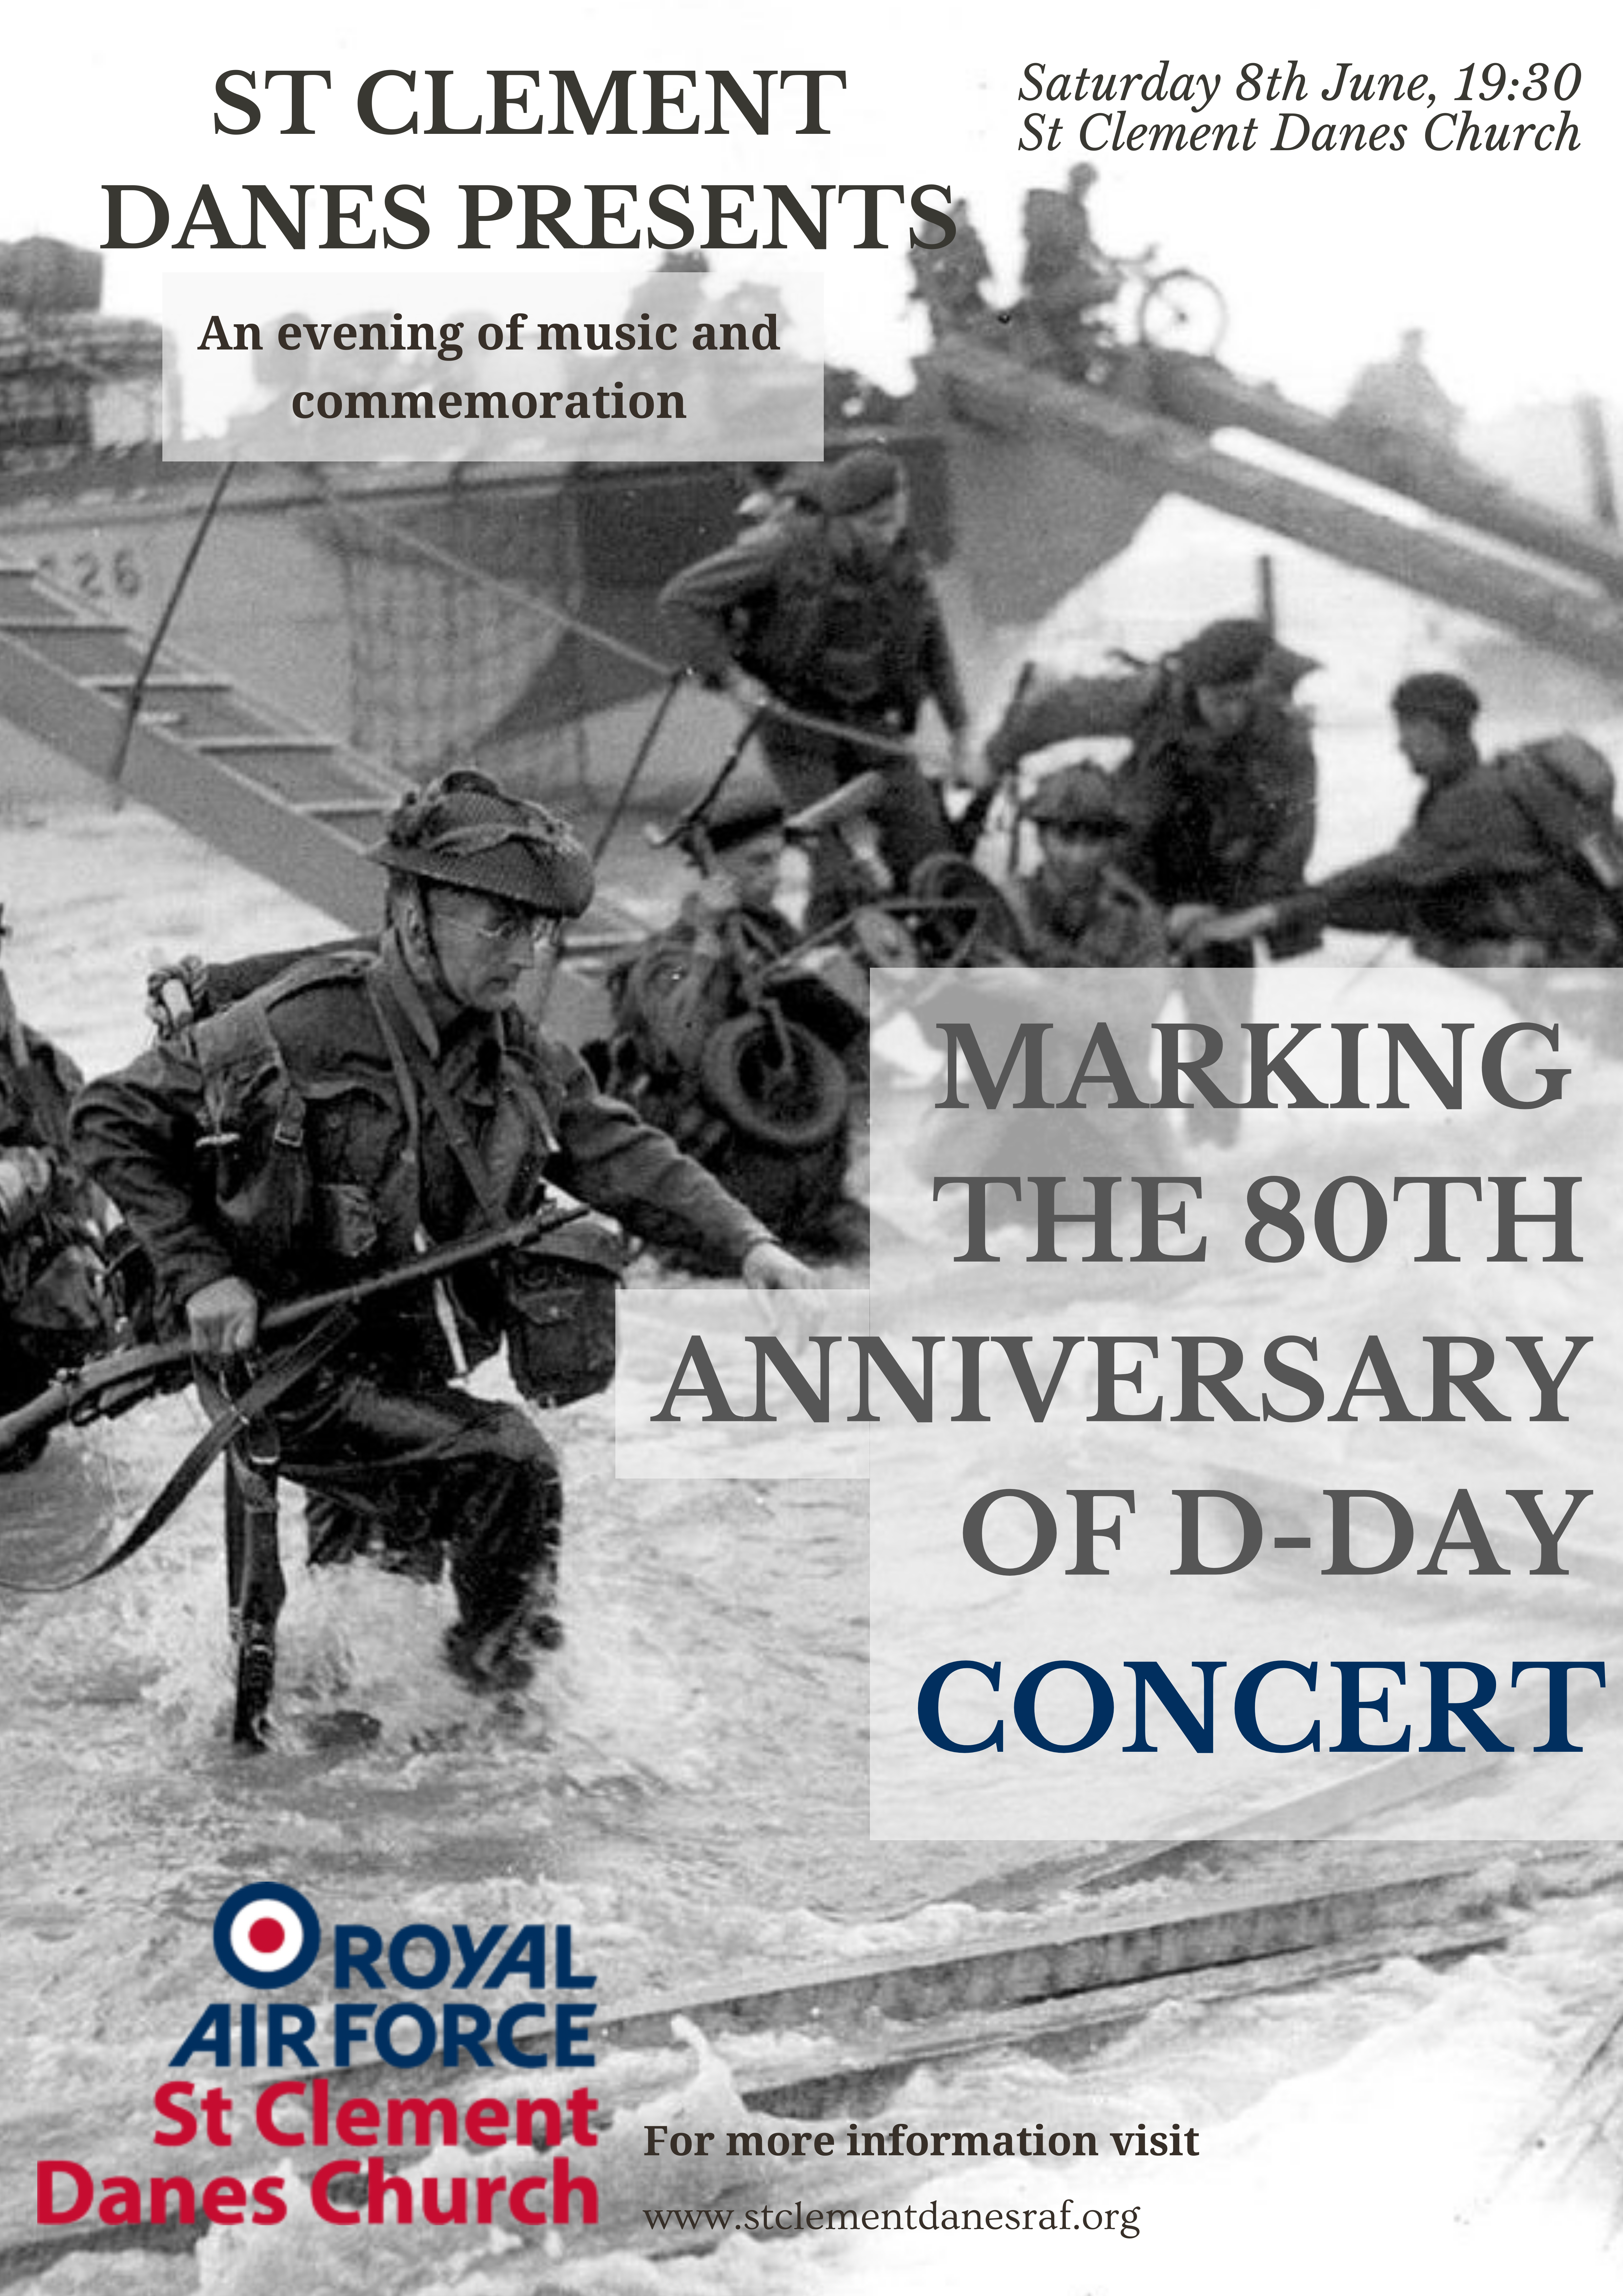 Featured image for “80th anniversary D-day concert”